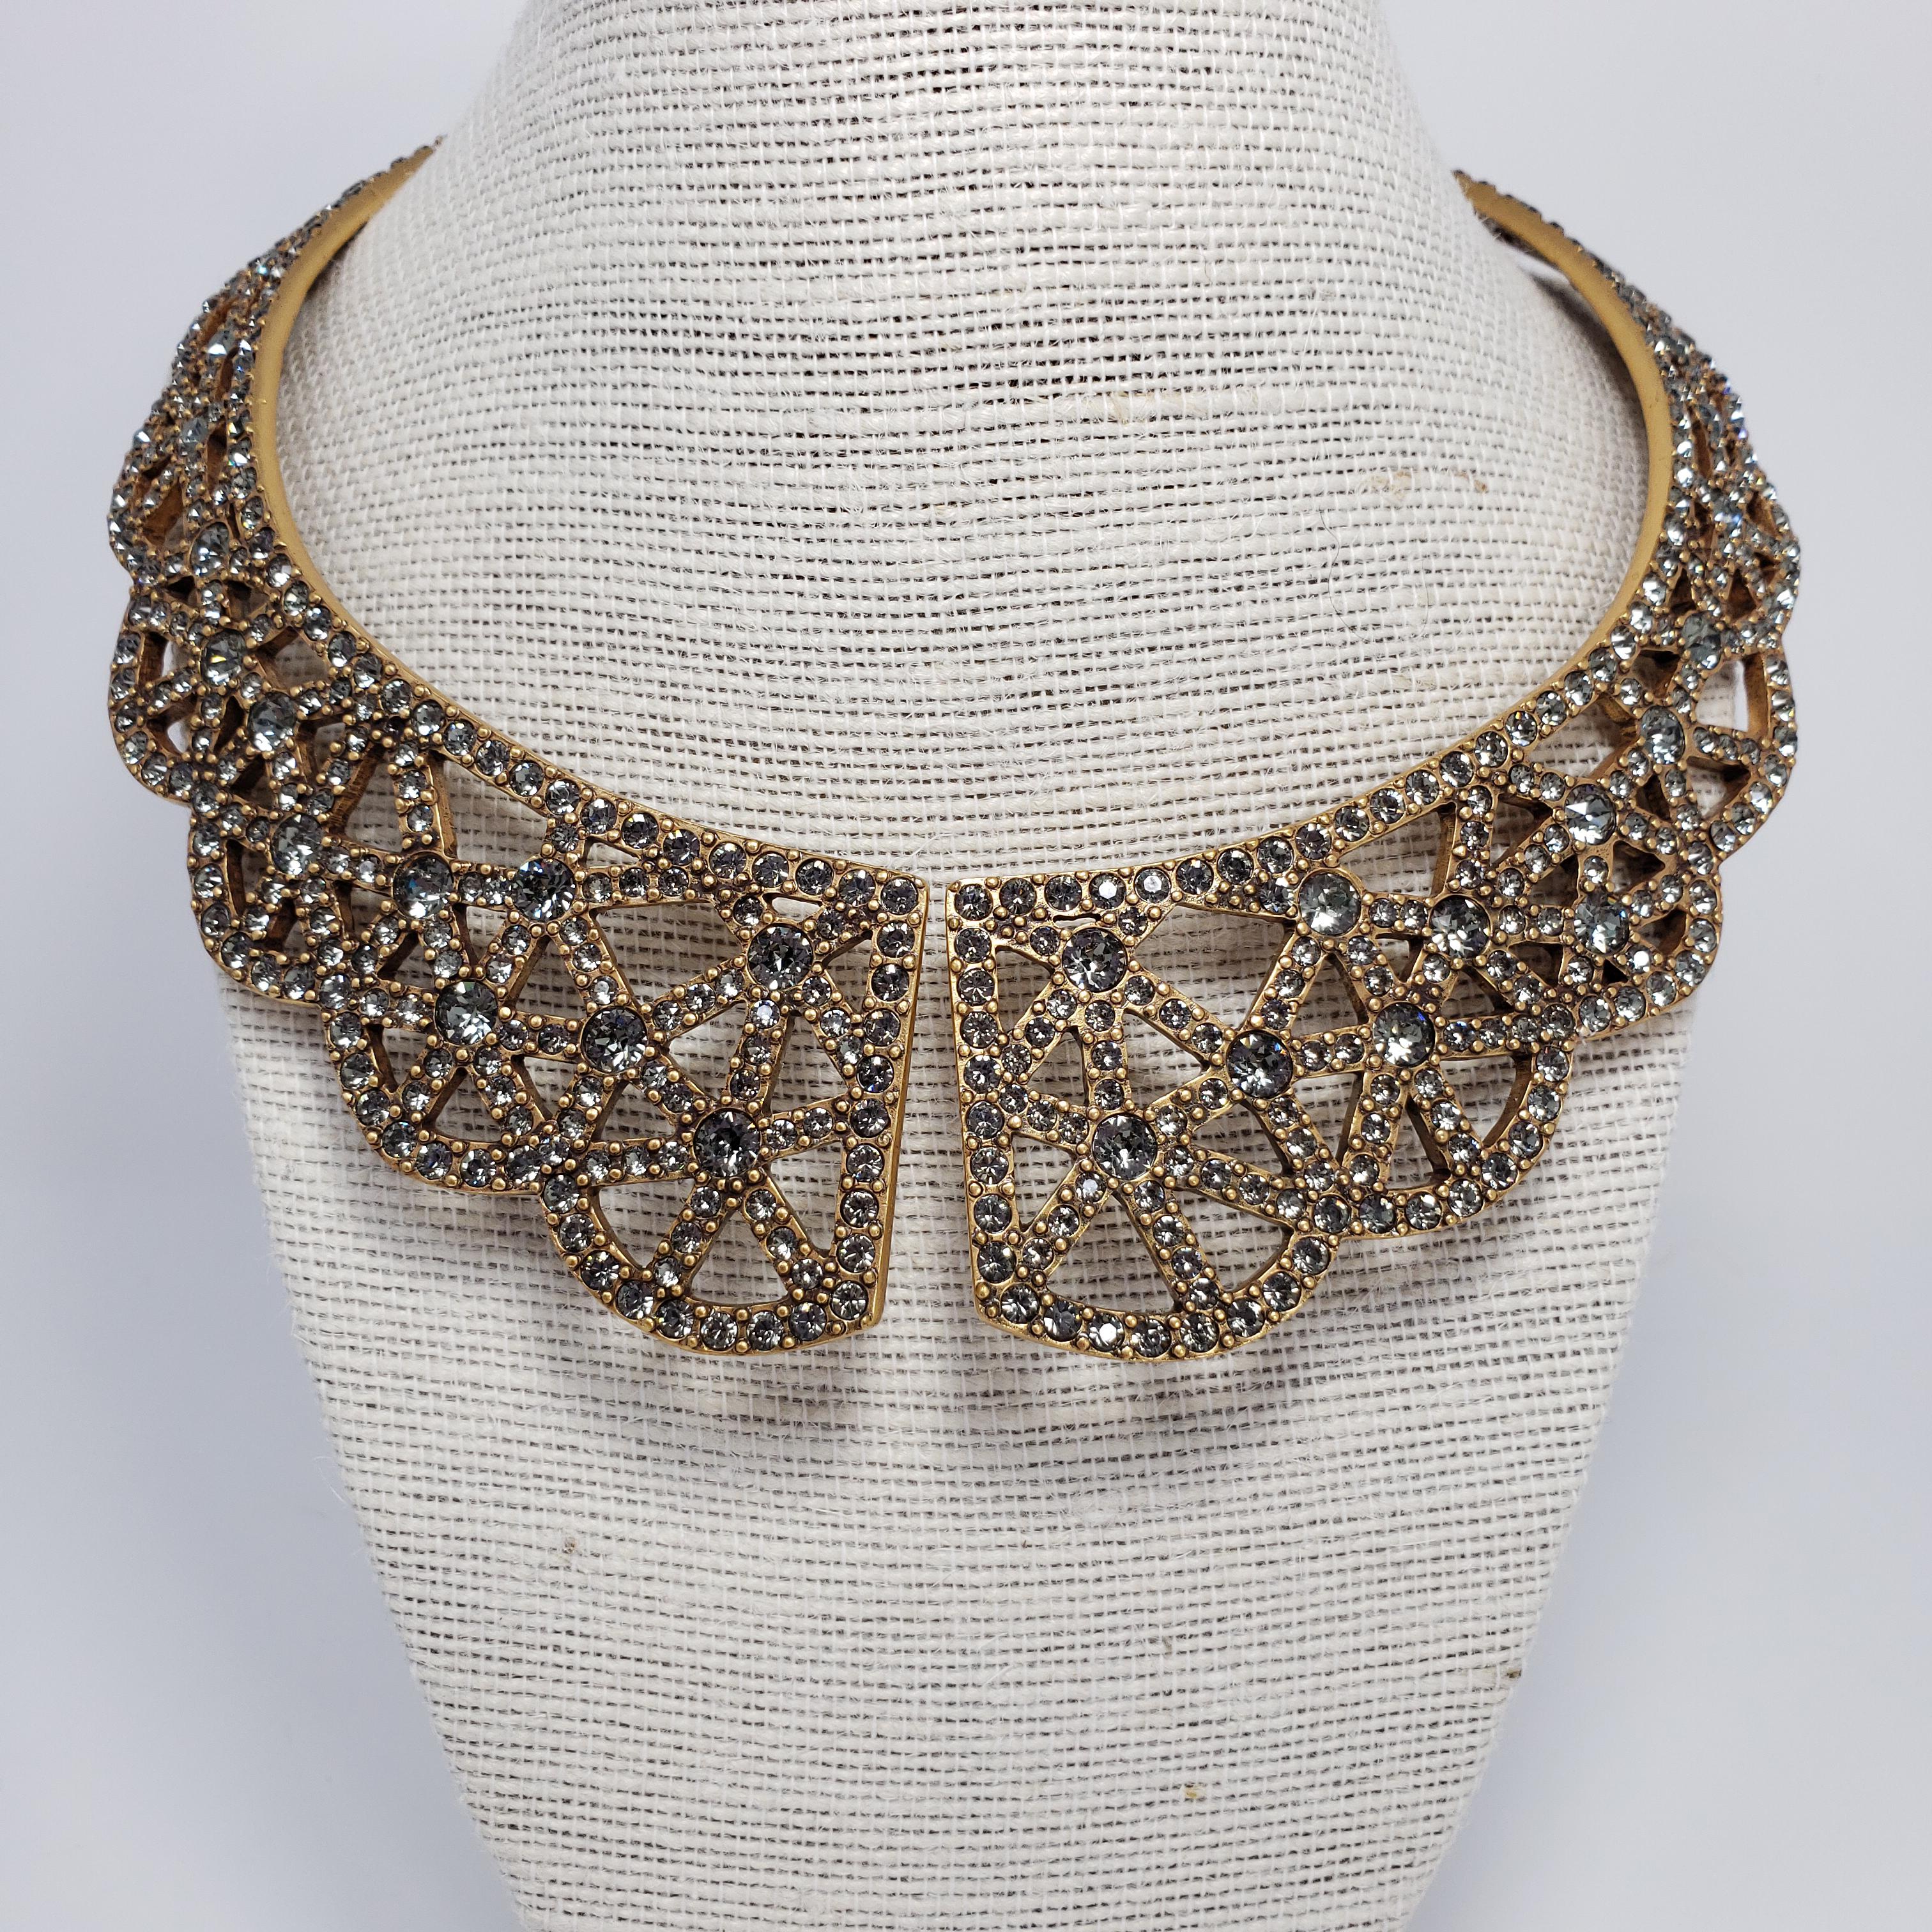 Golden collar necklace by Oscar de la Renta. Smoky gray crystals set in decorative patterns.  Spring-hinge collar.

Hallmarks: Oscar de la Renta, Made in USA
Inner circumference approx 40 cm / 15.75 inches